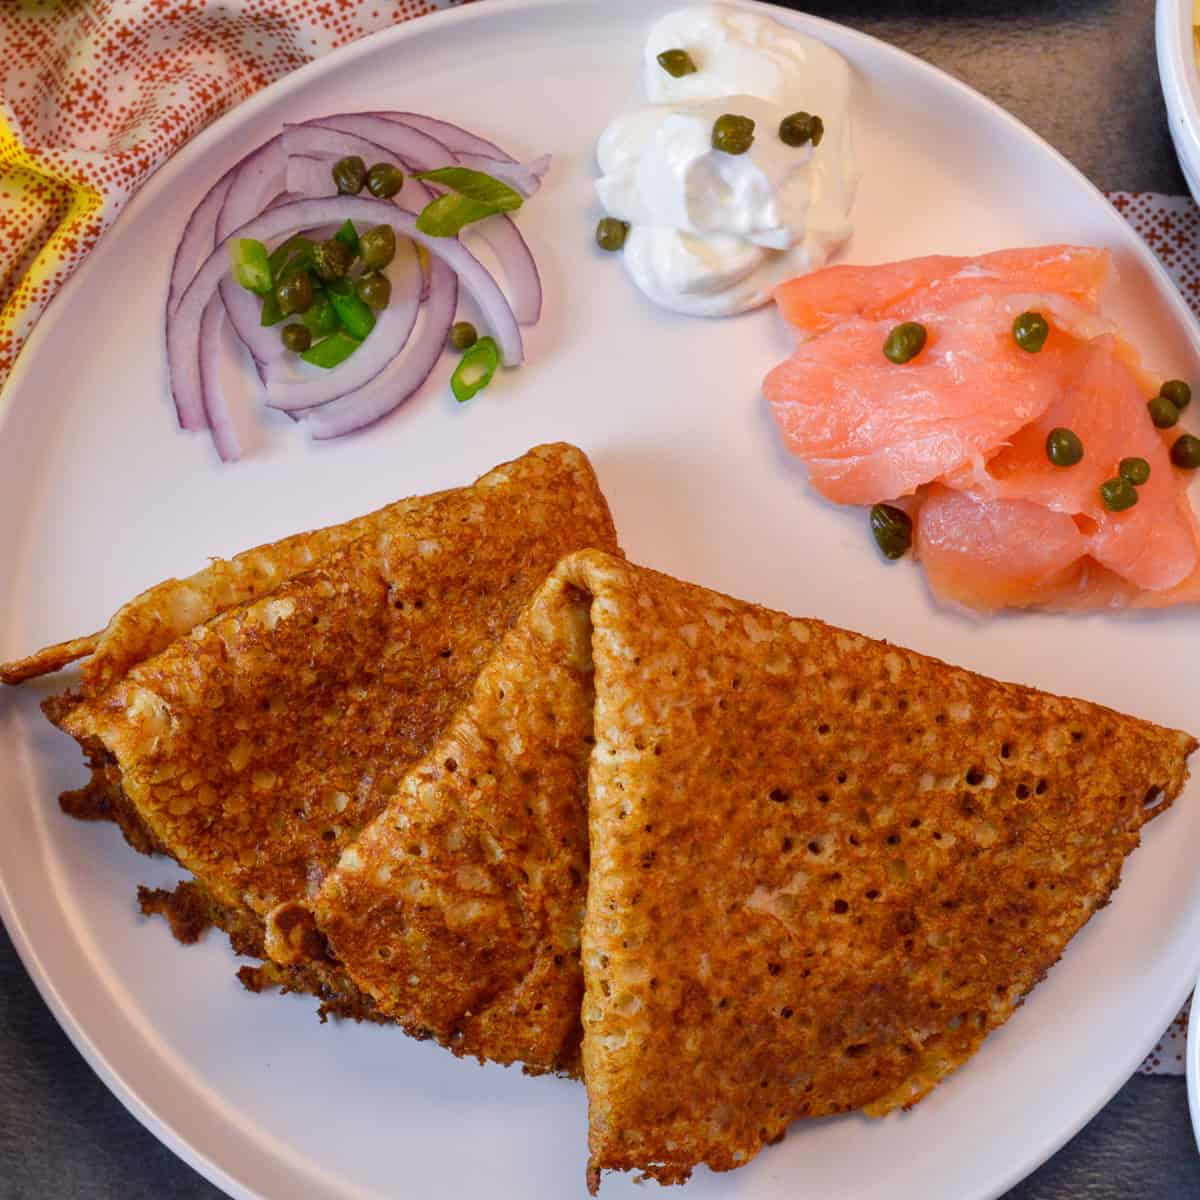 2 blini folded into fourths on plate with red and green onion, sour cream and smoked salmon with capers on red and white napkin